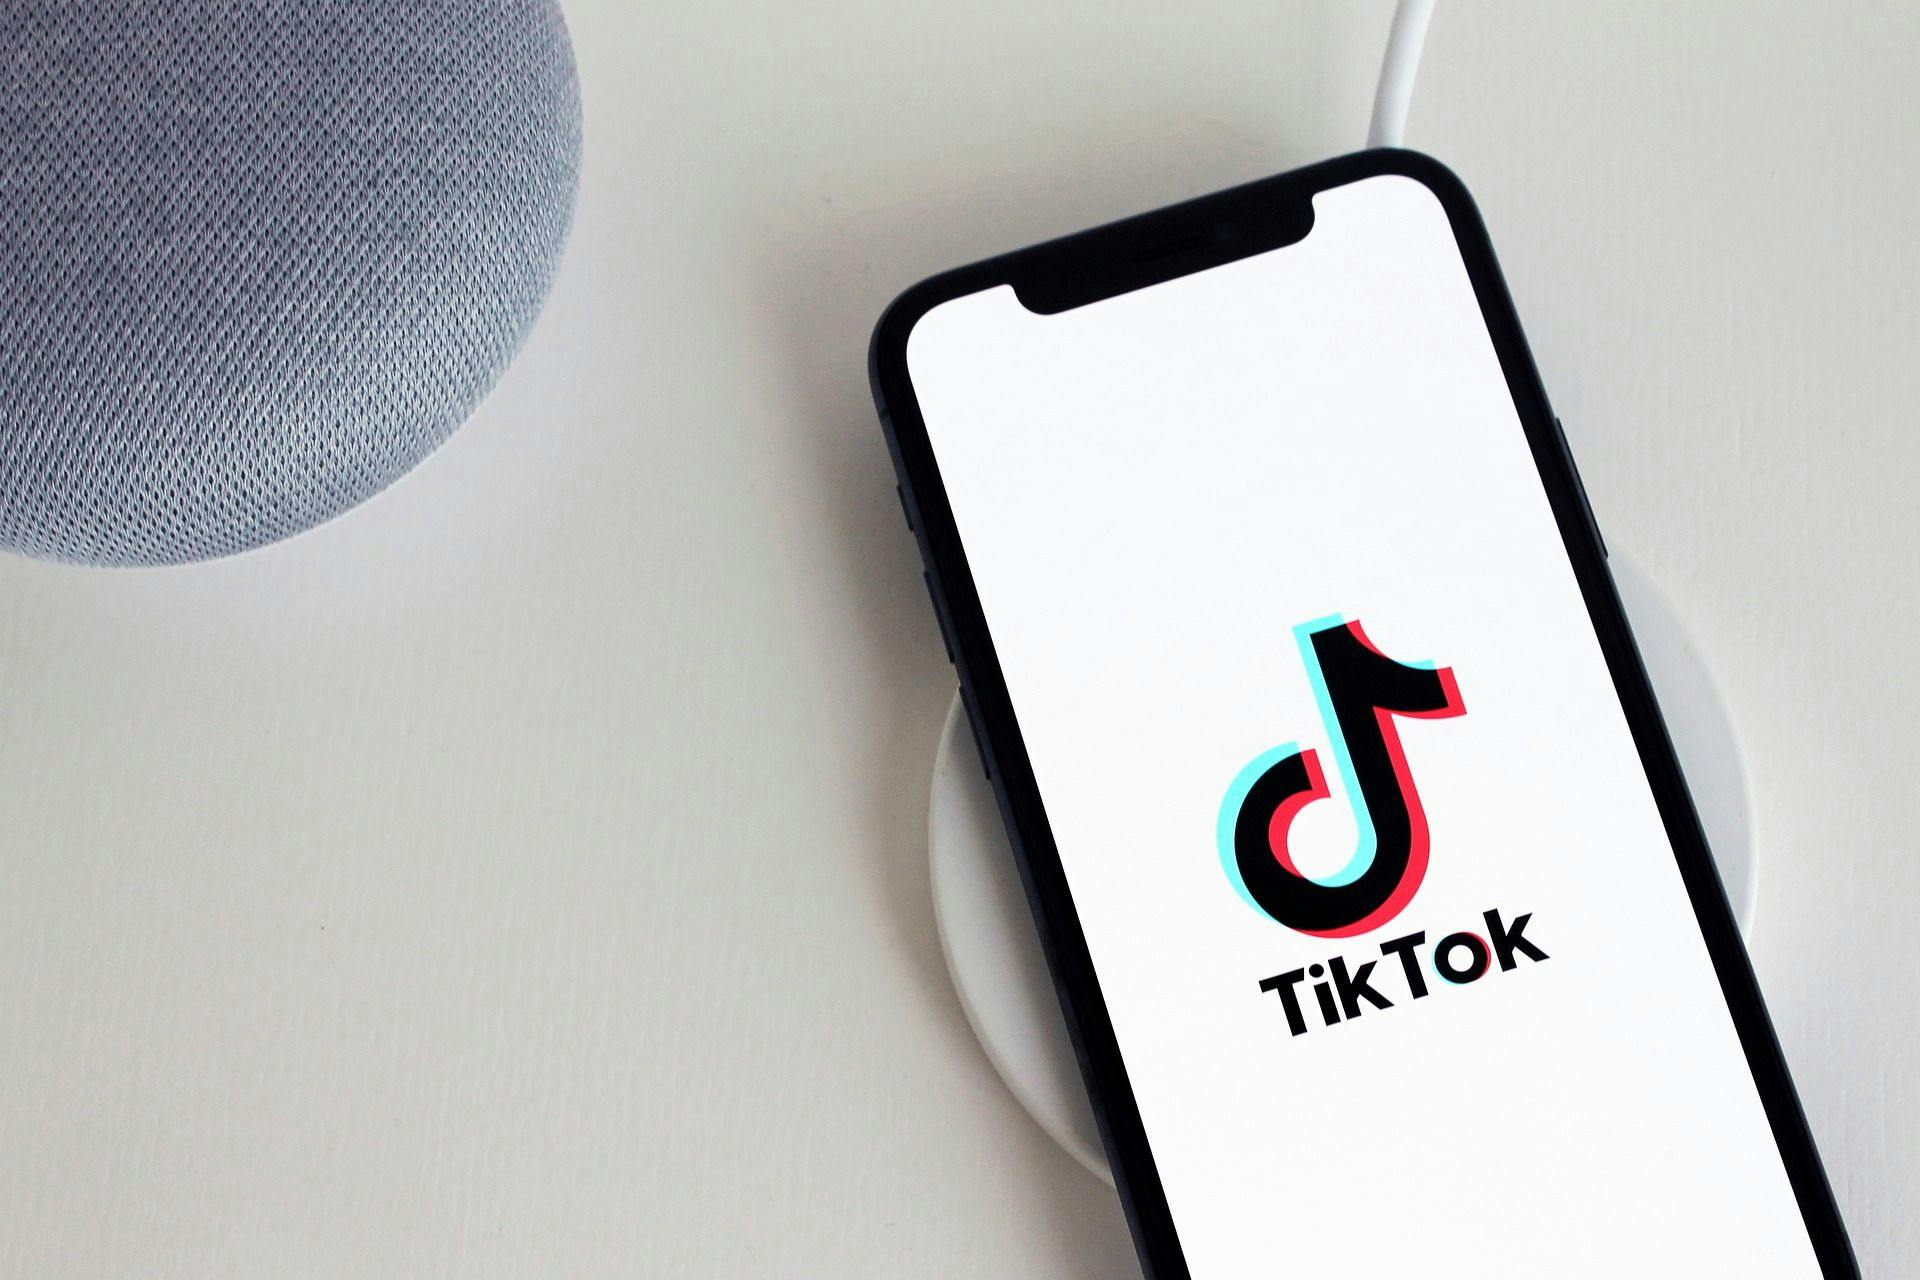 /how-to-hack-tiktok-accounts-5-common-vulnerabilities-3a8337k2 feature image